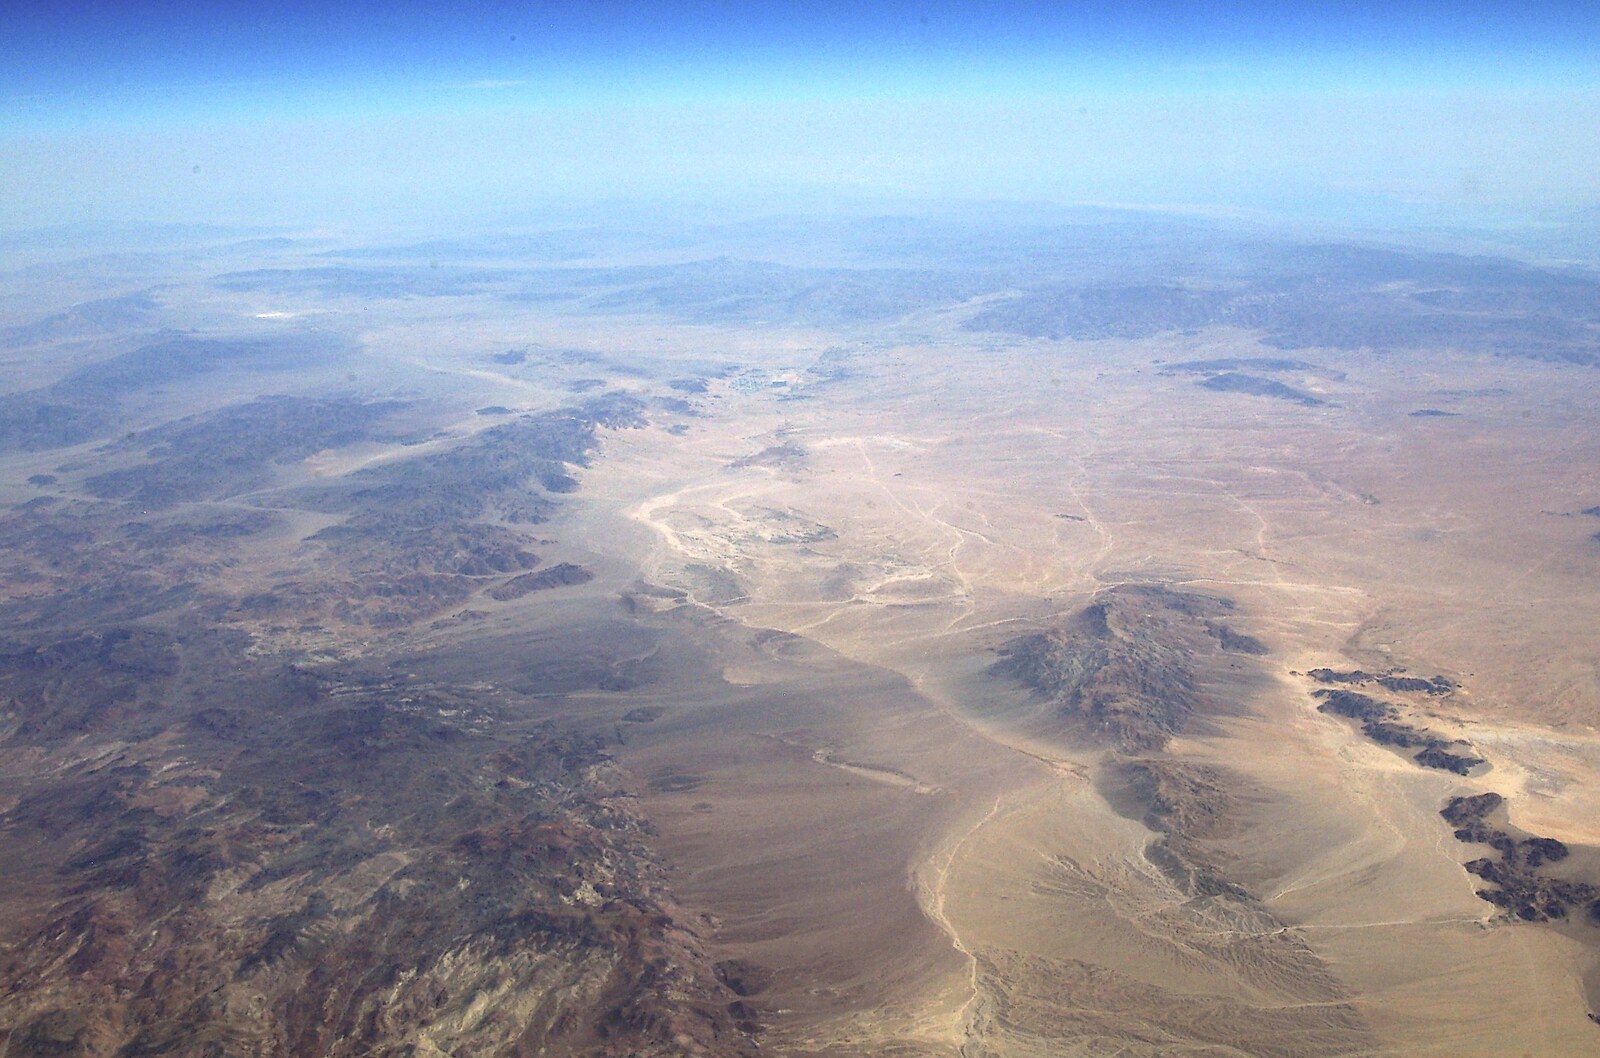 Another aerial desert vista from San Diego Seven: The Desert and the Dunes, Arizona and California, US - 22nd April